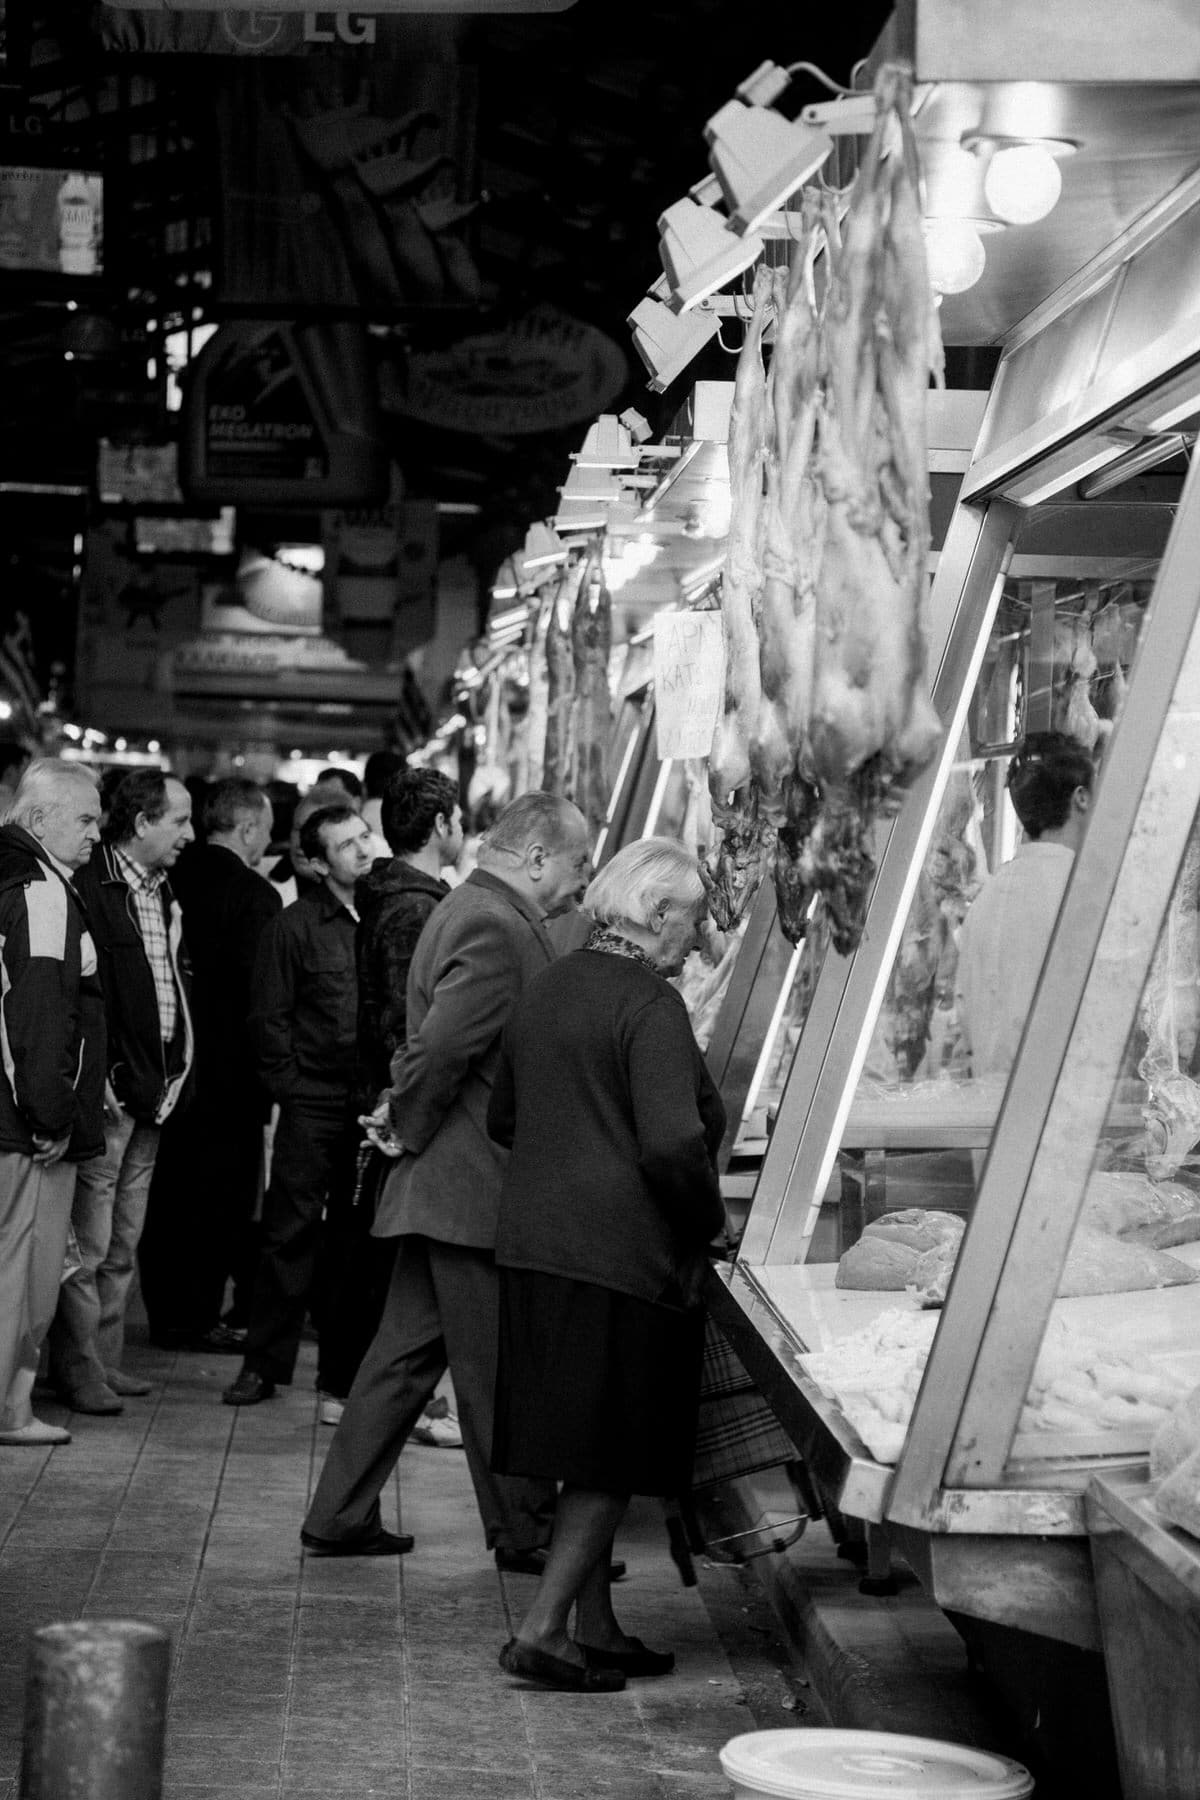 central-market-Athens-Greece-black-and-white-fine-art-photography-by-Studio-L-photographer-Laura-Schneider-_3053